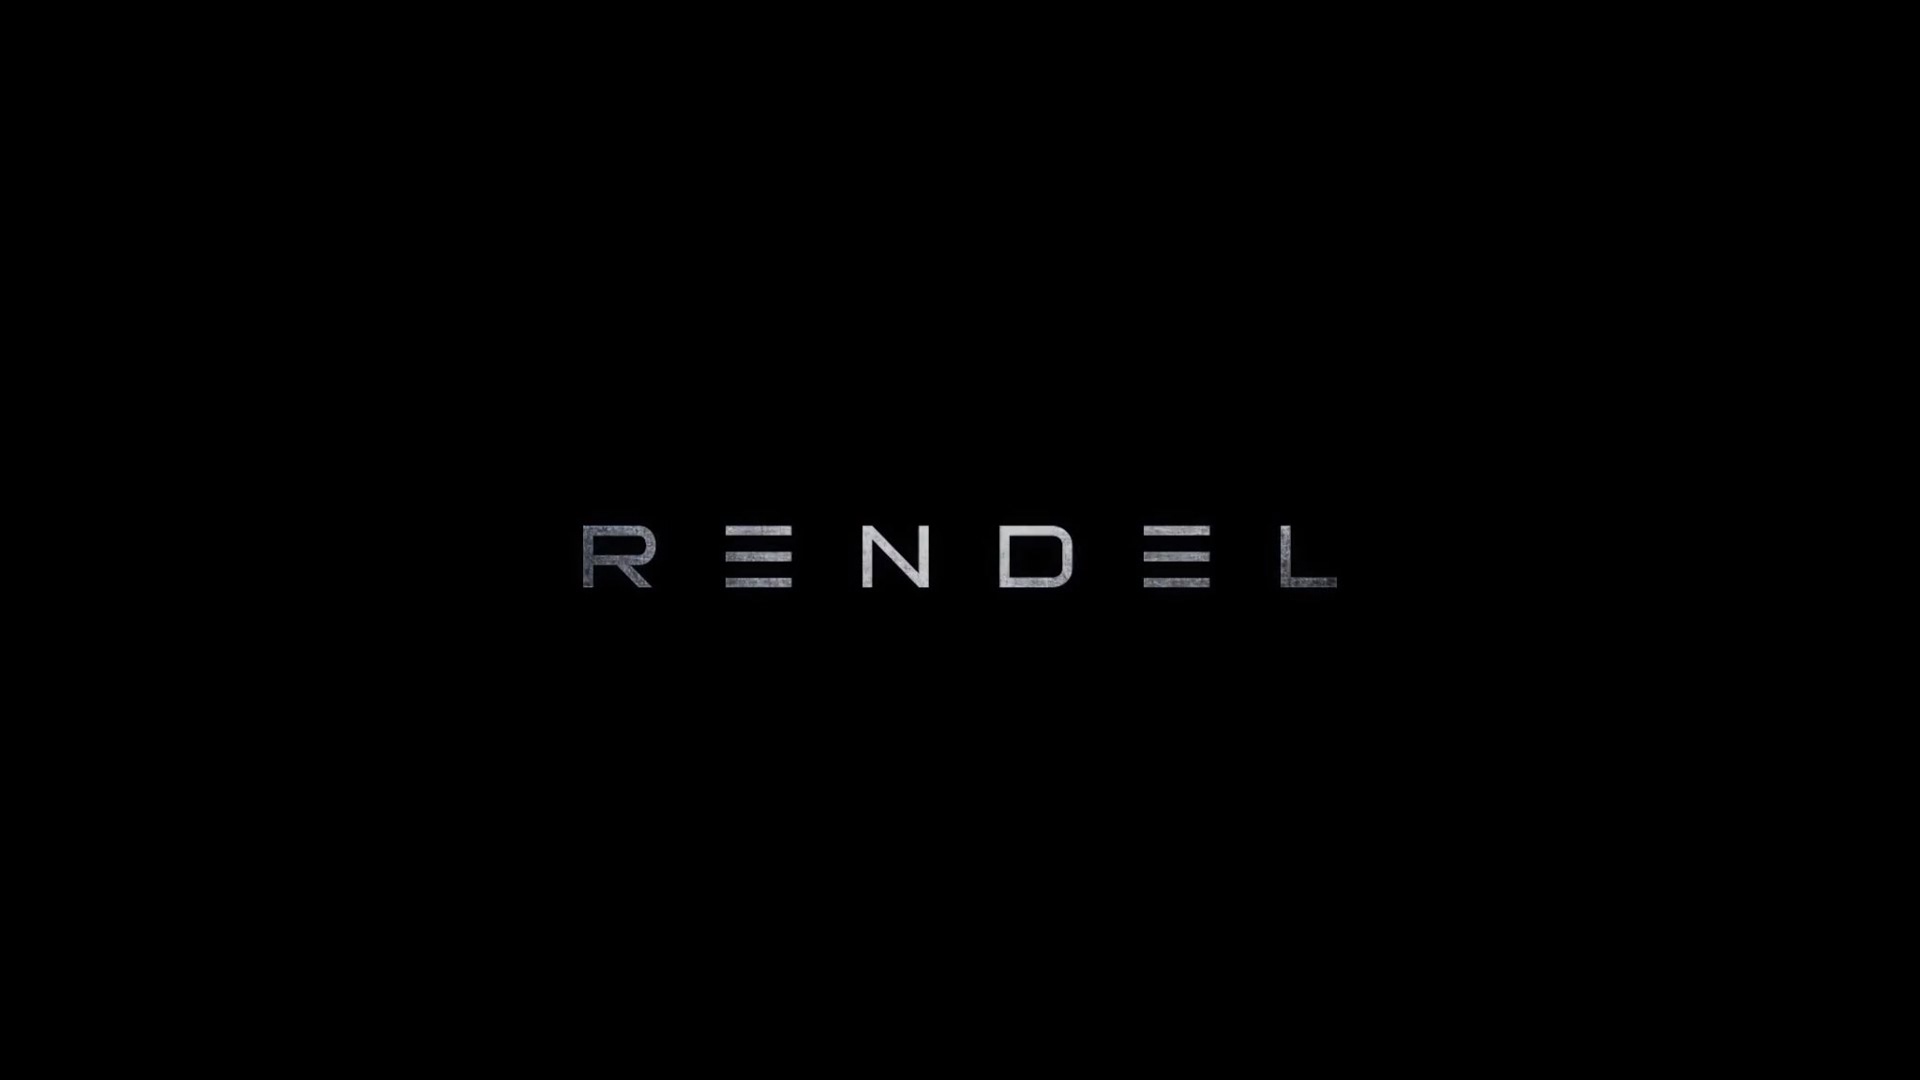 Amazing Rendel Pictures & Backgrounds